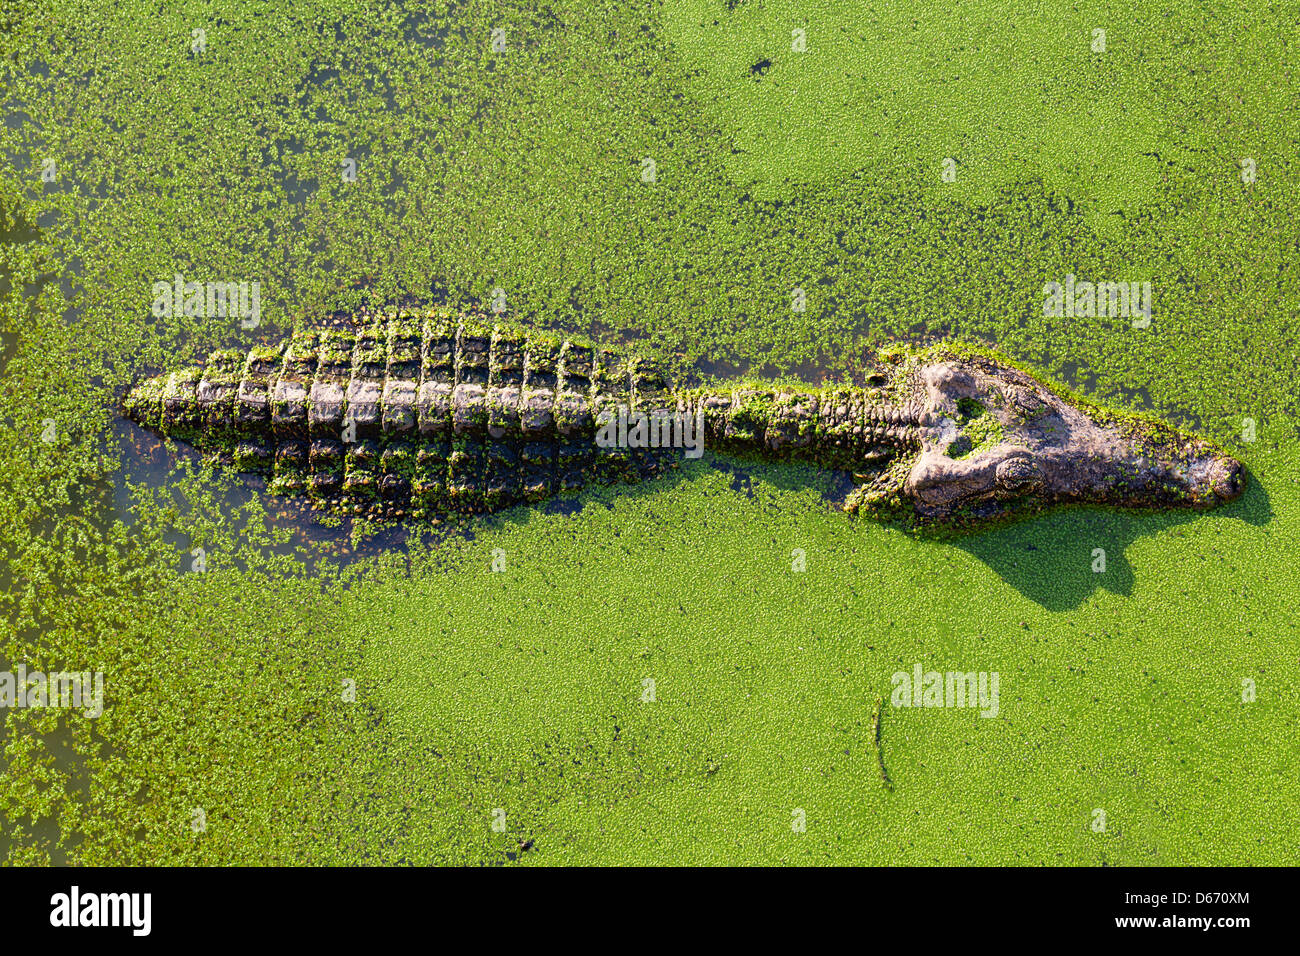 young alligator in Thailand wetland pond with duckweed and copy space. View from above. Stock Photo